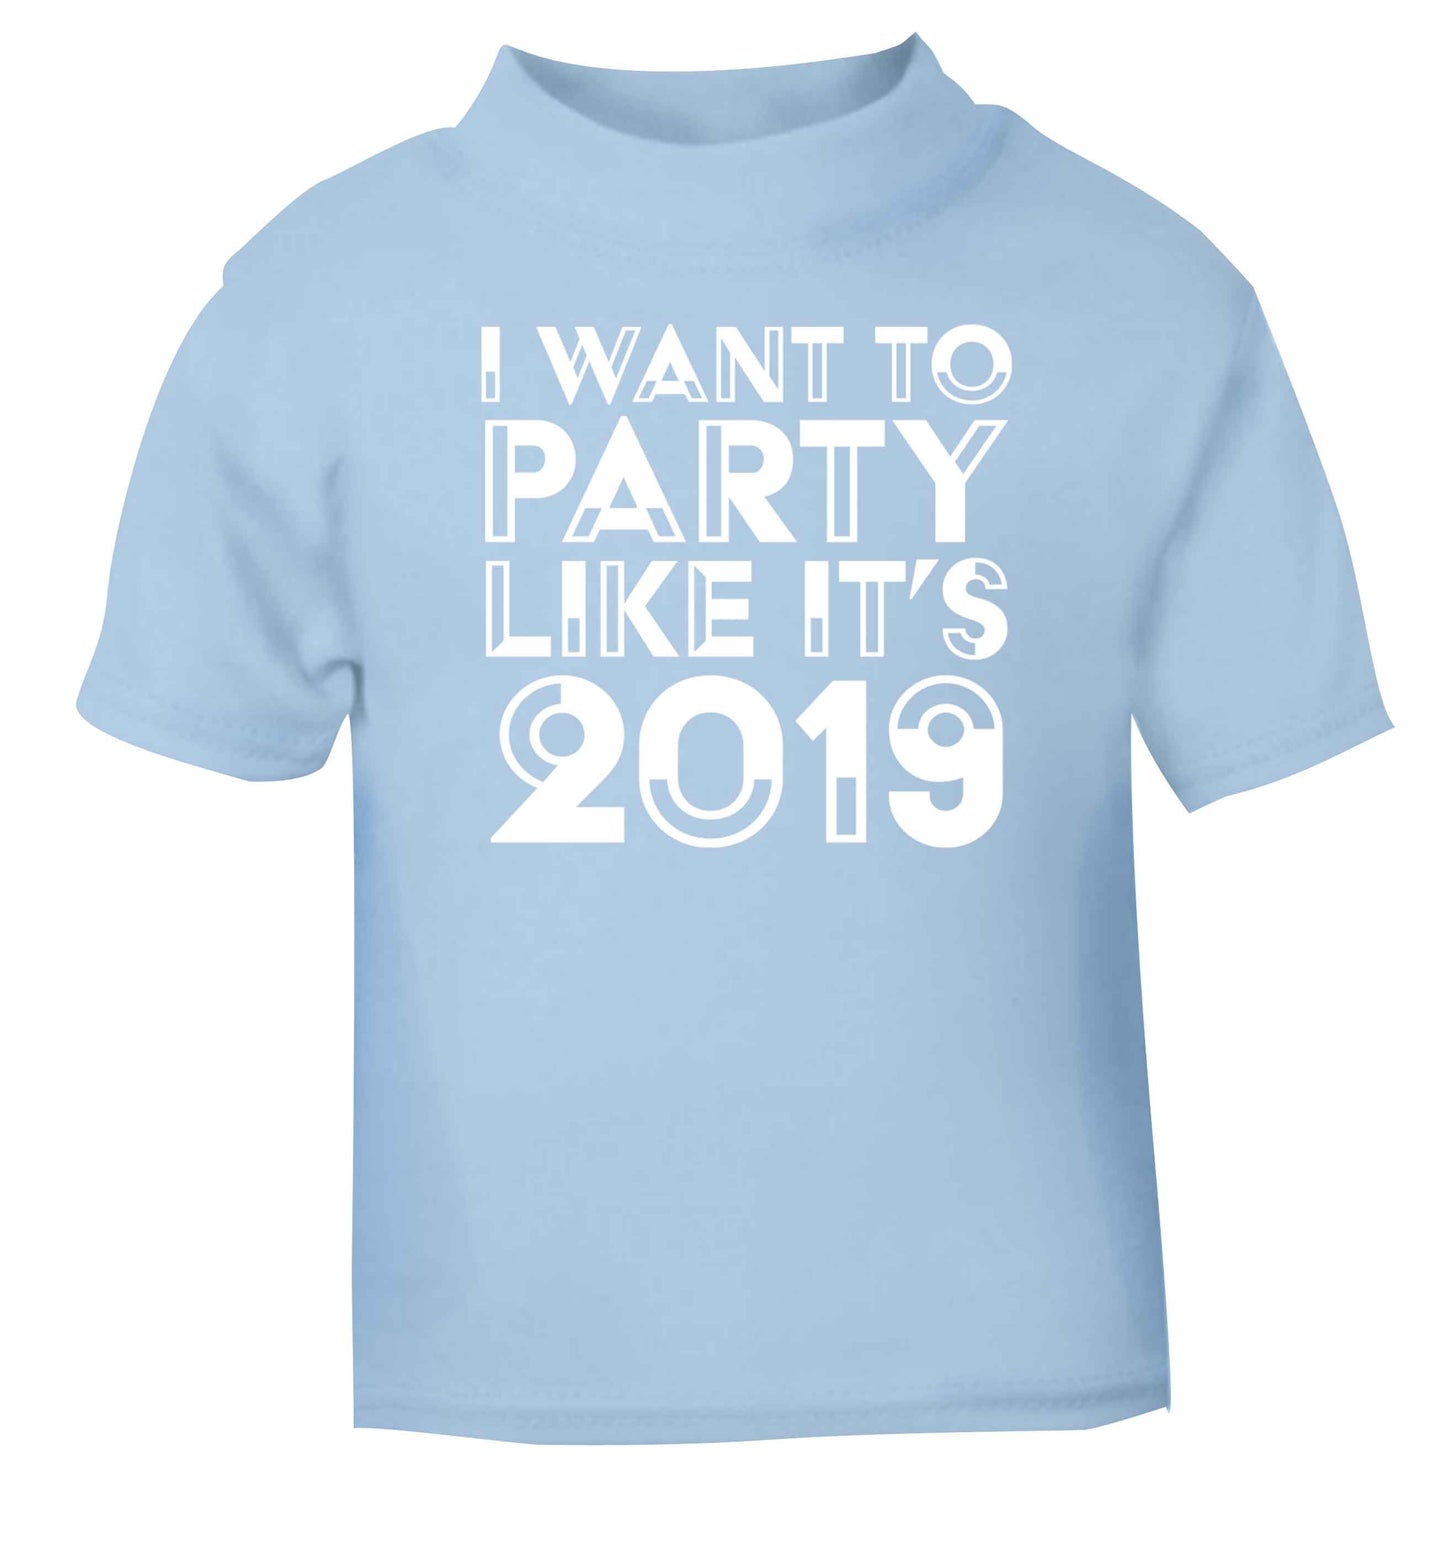 I want to party like it's 2019 light blue baby toddler Tshirt 2 Years